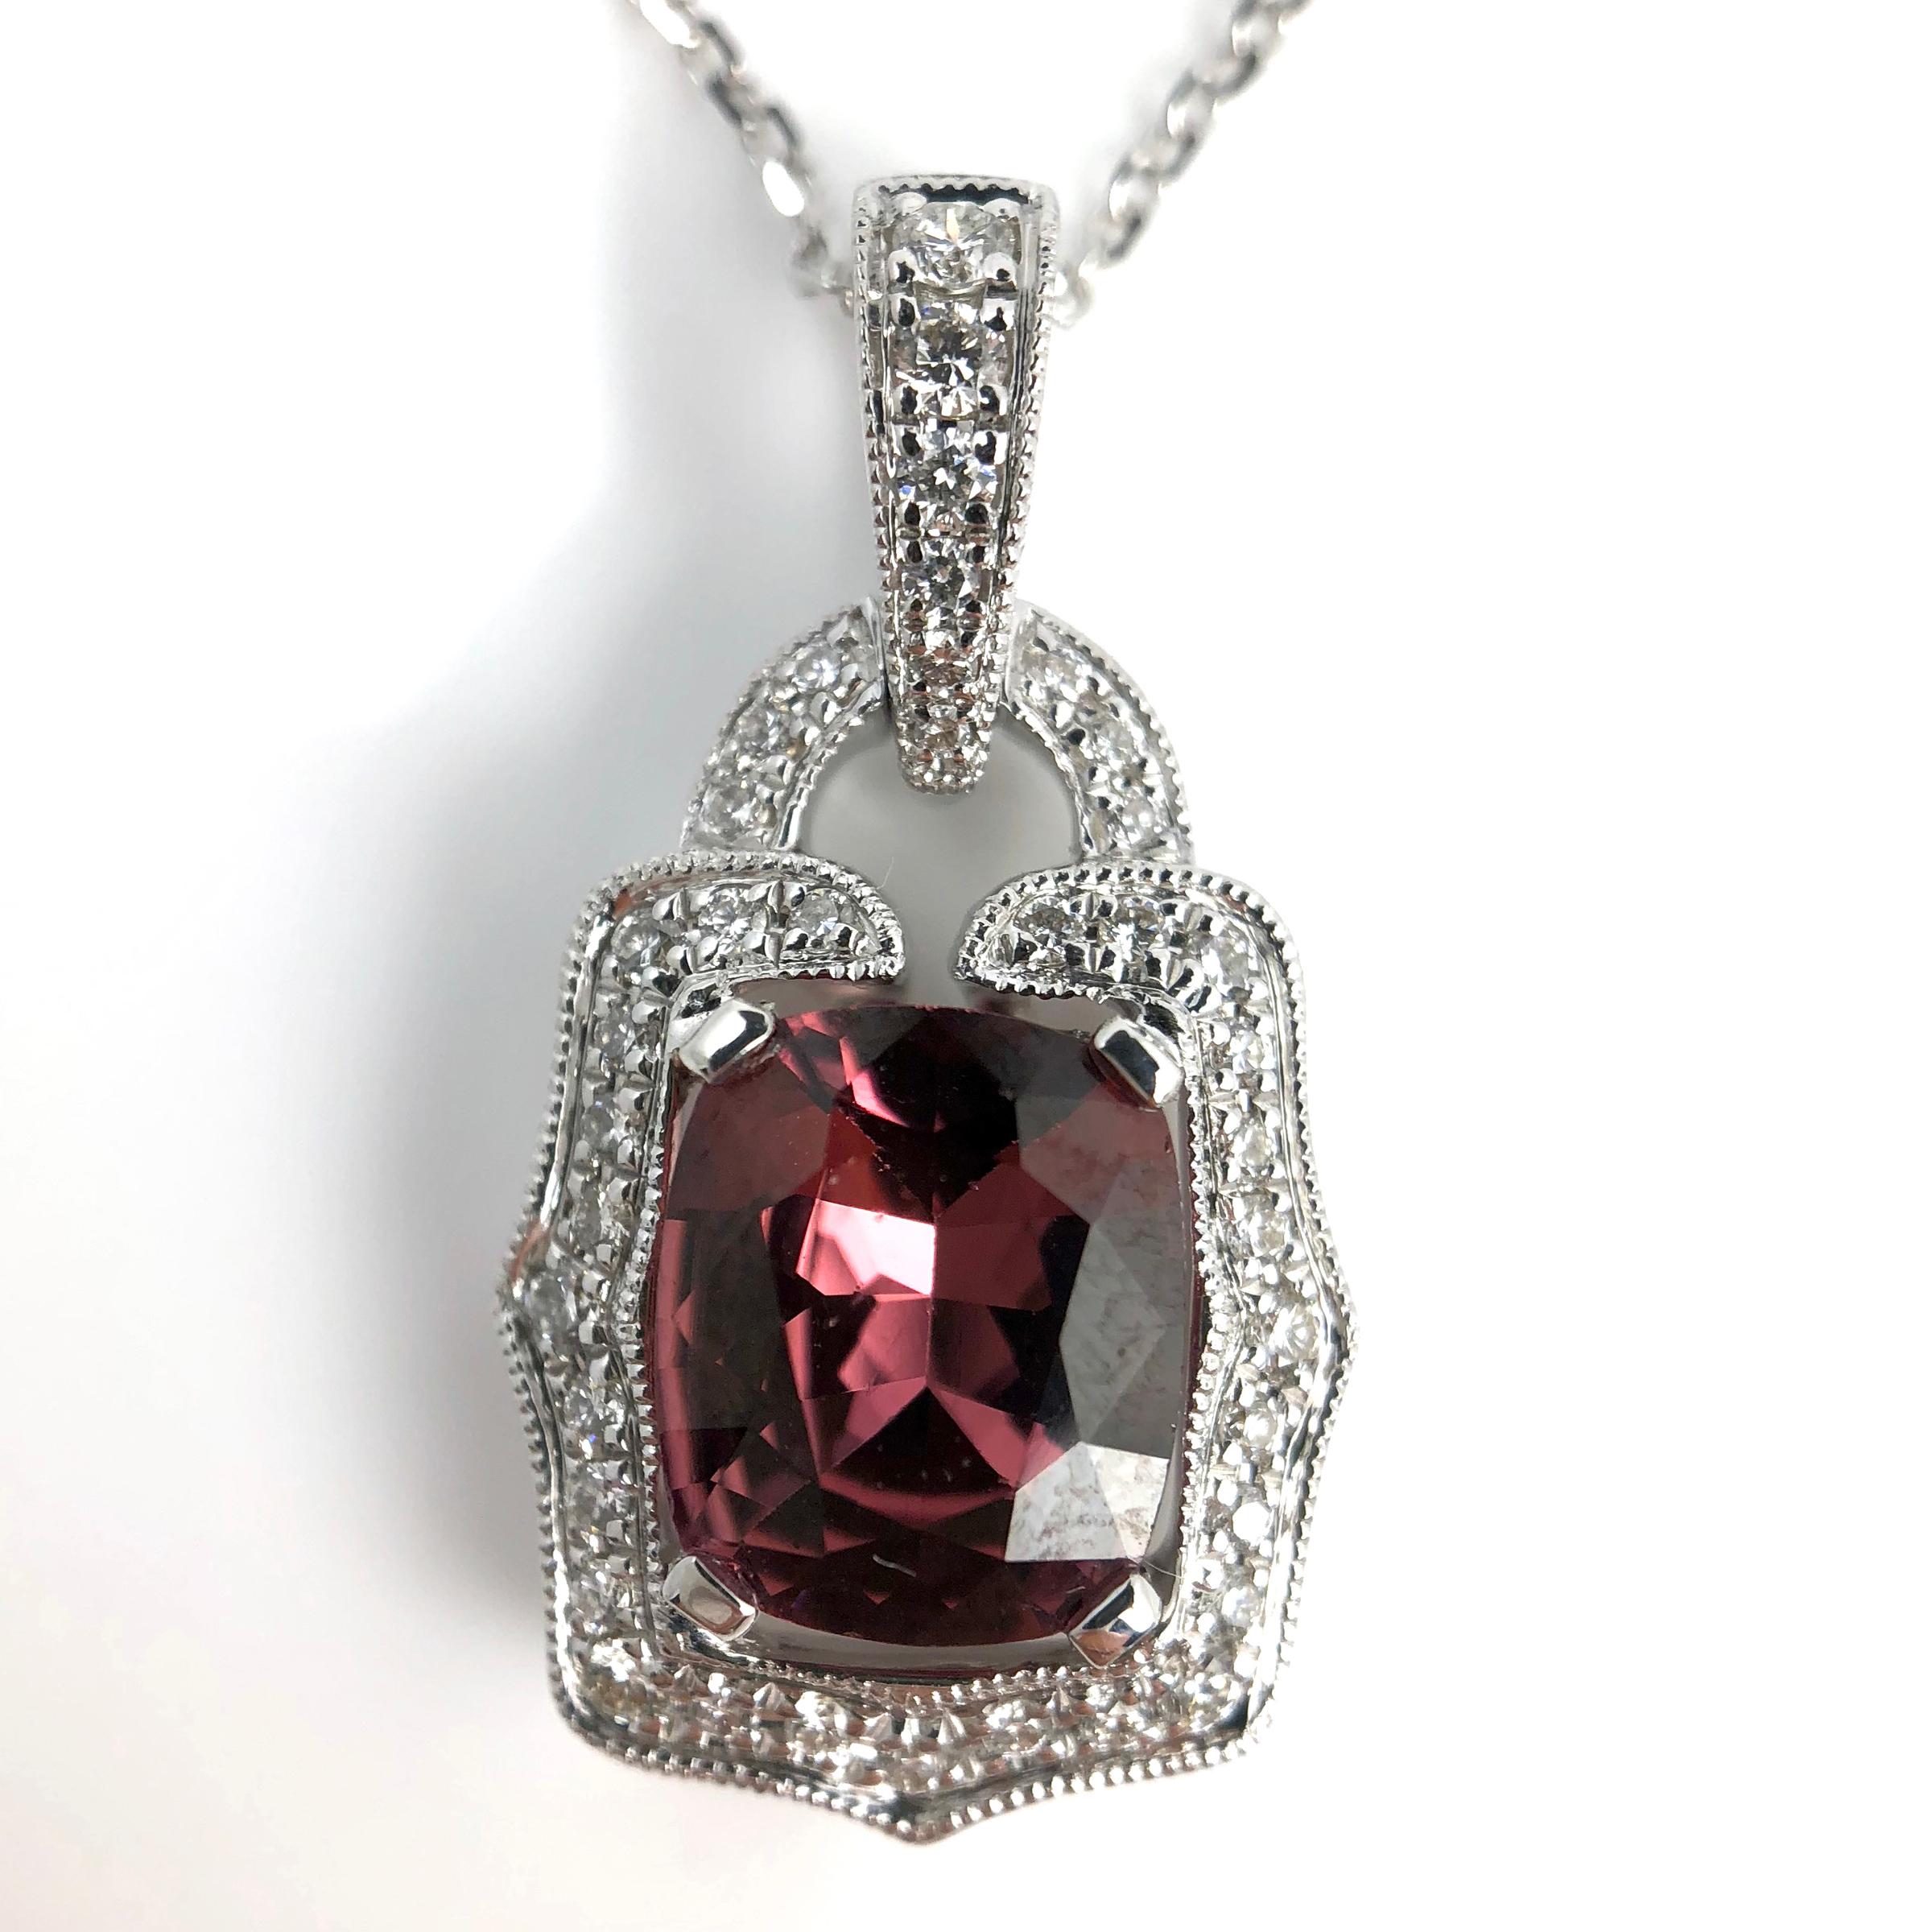 This pendant features a 1.67 carat cushion cut raspberry garnet, surrounded by 0.19 carats round white diamonds, in an antique lock shape, including a decorated bail.

Center: 1.67 carats cushion cut raspberry purple-pink garnet
Total diamond weight